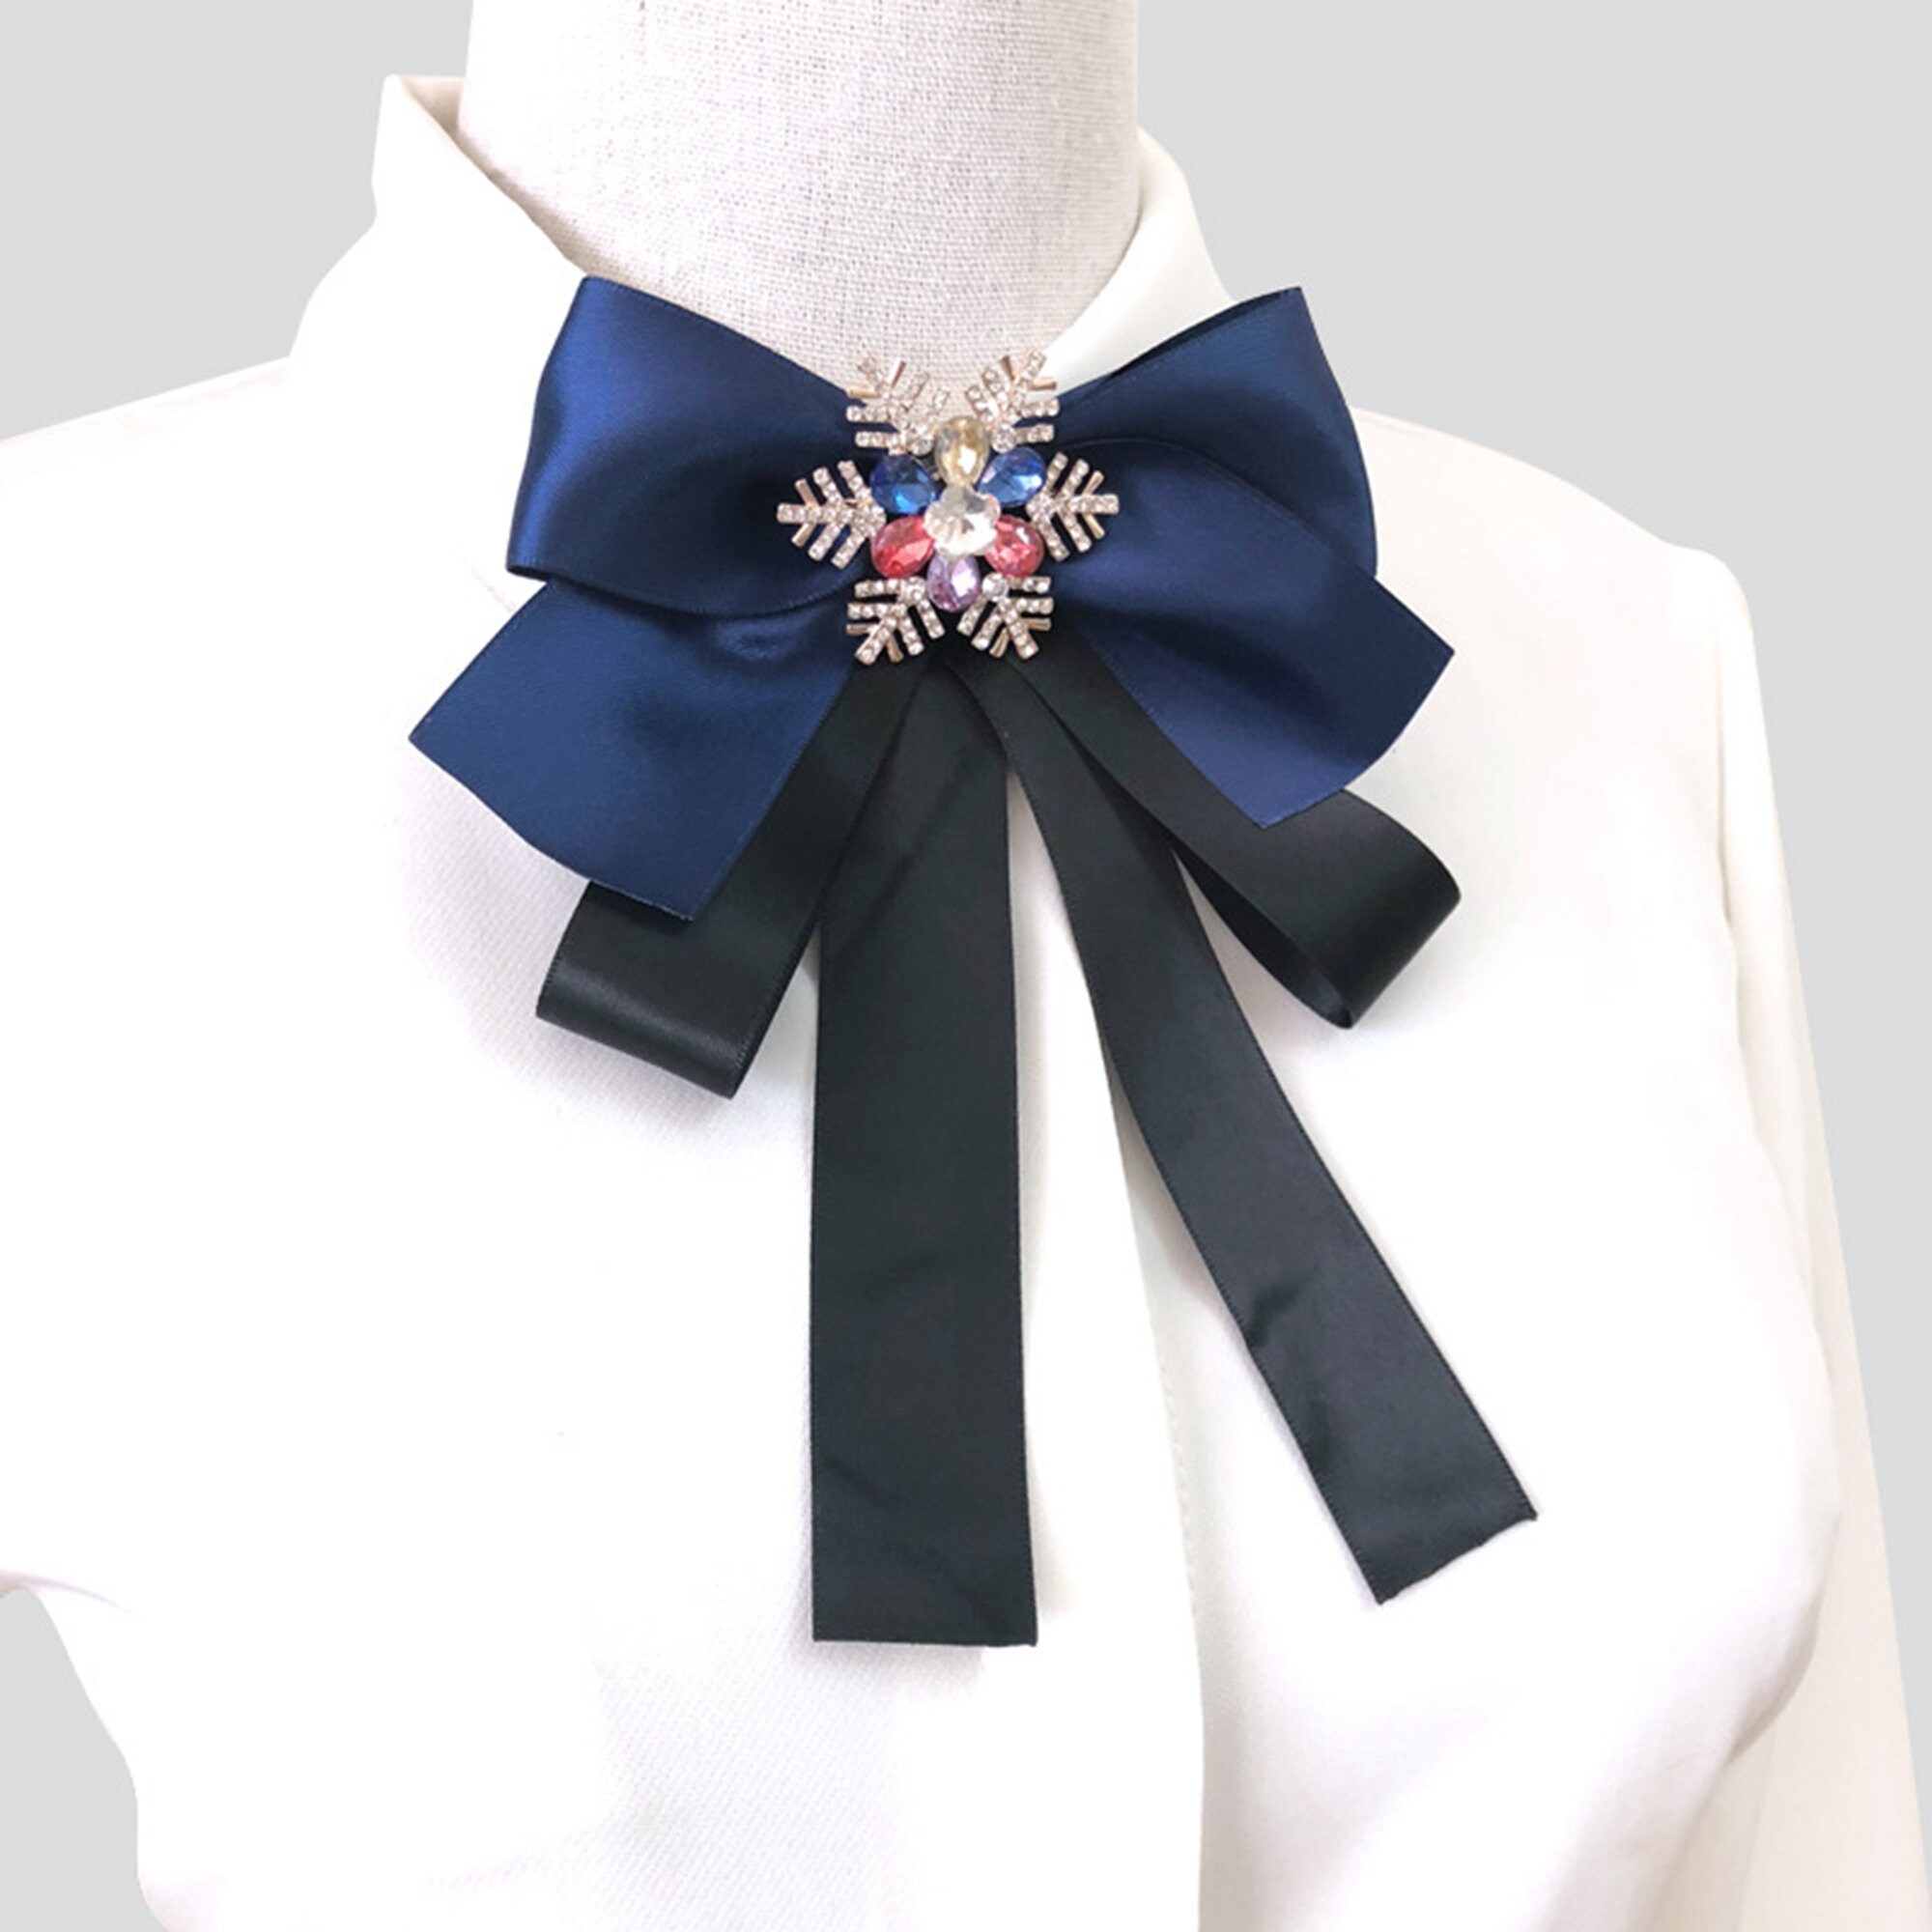 Snowflake Bow Tie Brooch Tie Pin Hand Made Ribbon Brooch With - Etsy